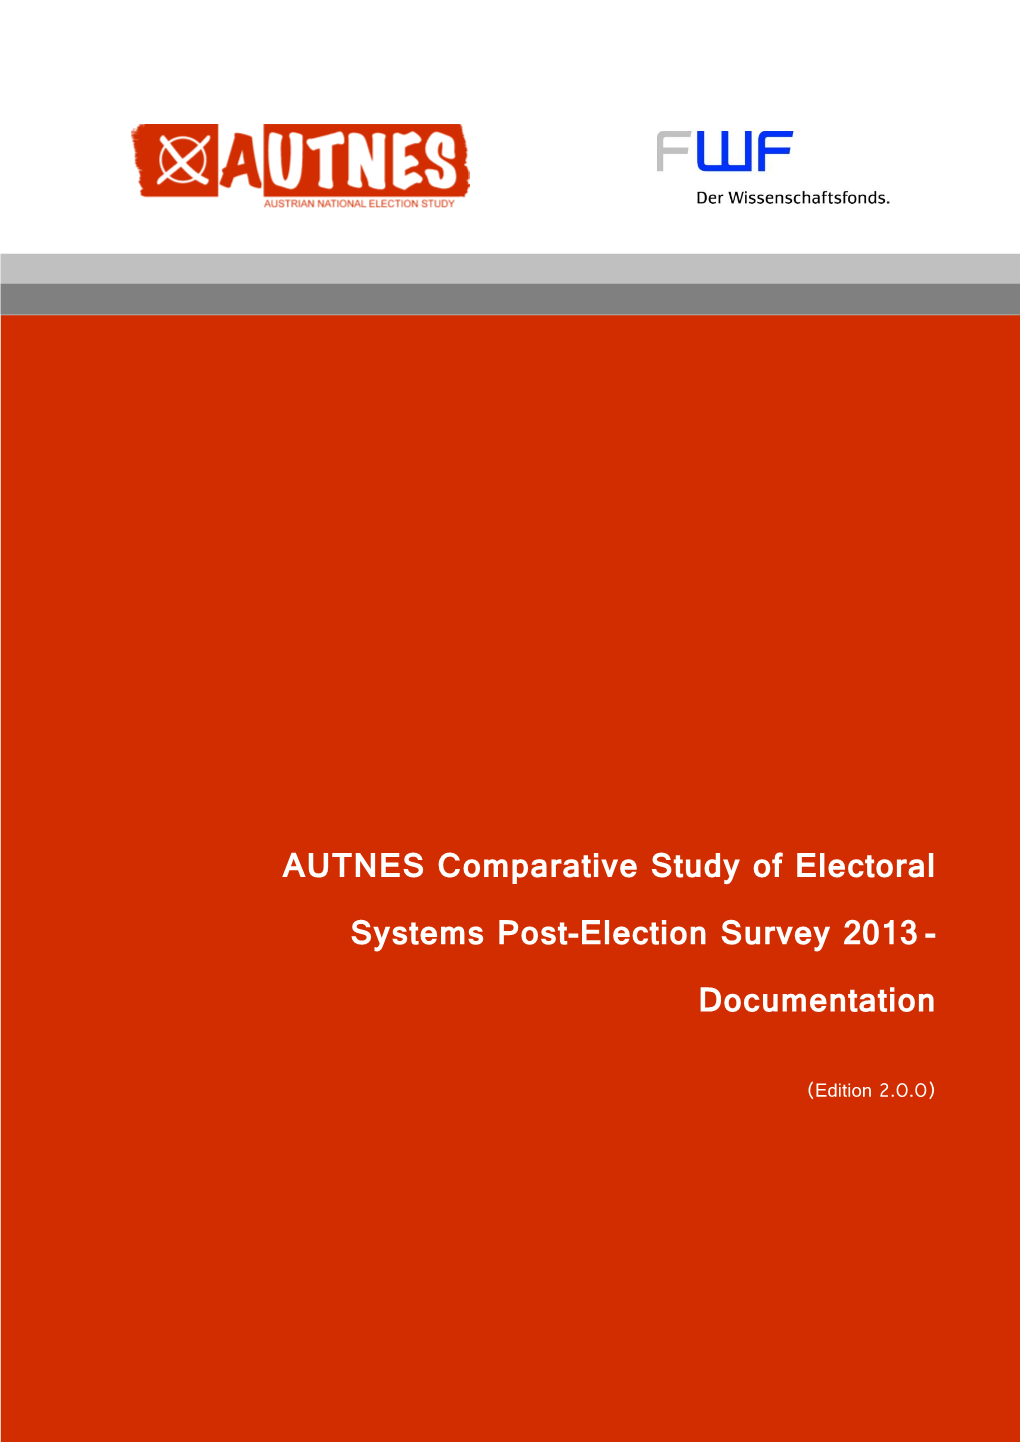 1 1 AUTNES Comparative Study of Electoral Systems